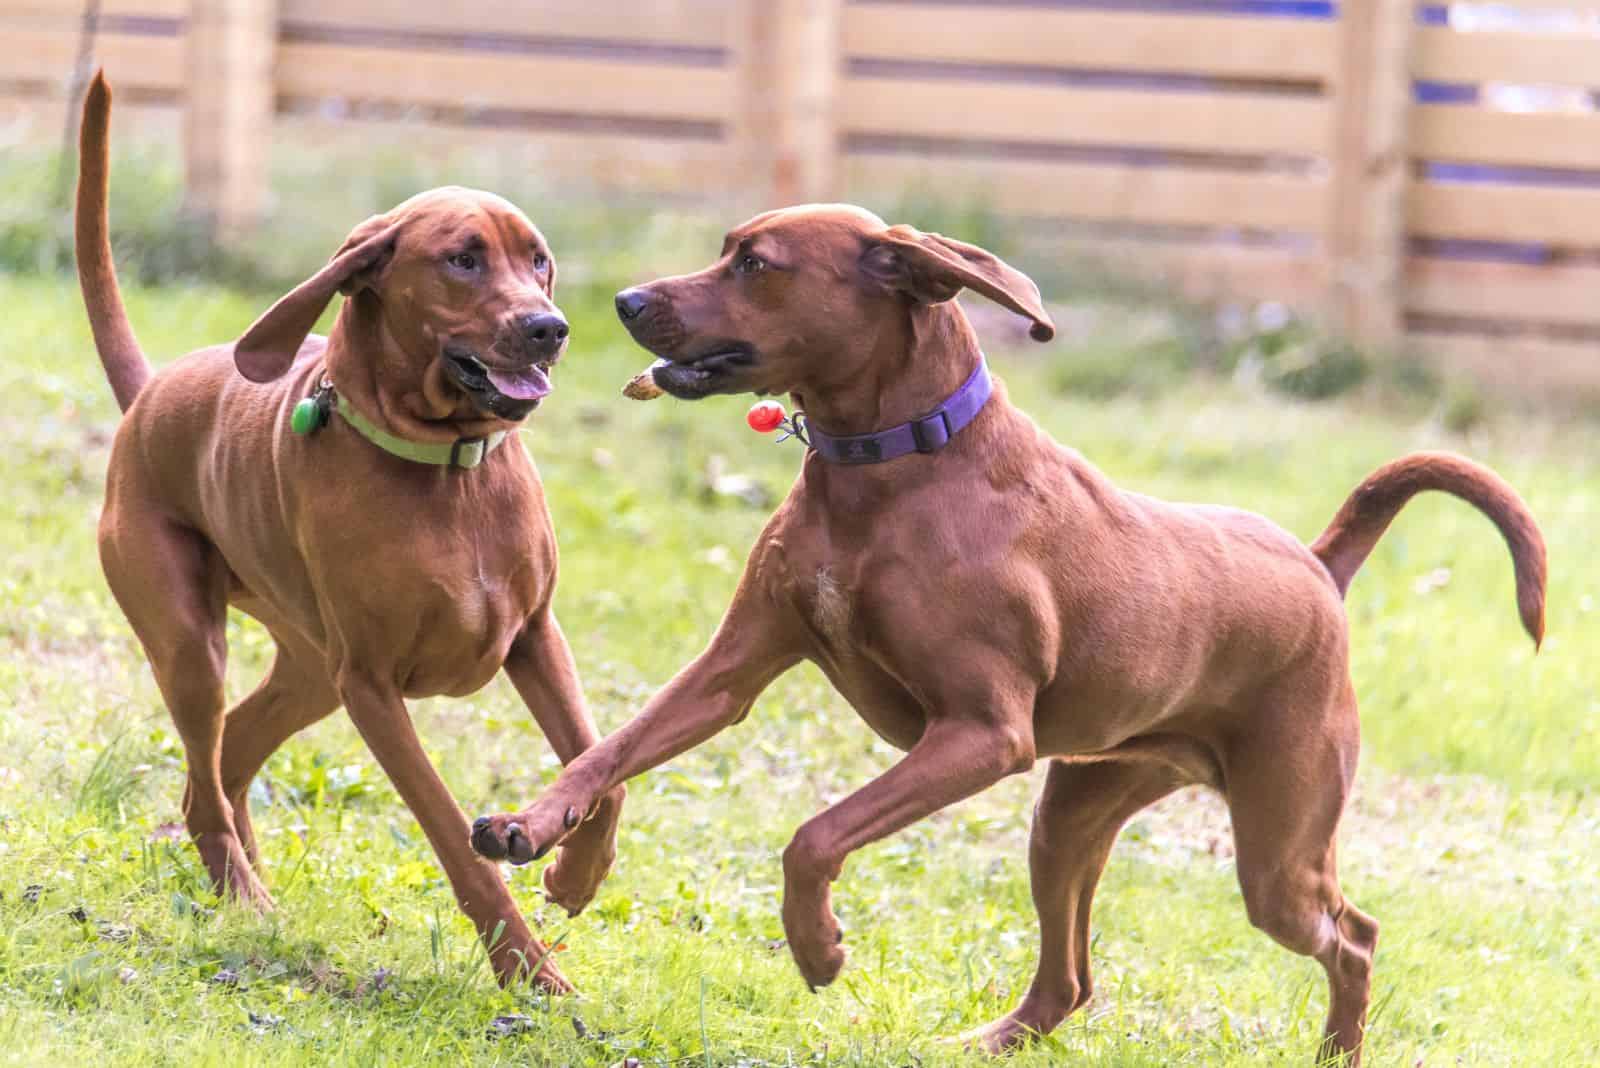 puppies Redbone Coonhounds are playing